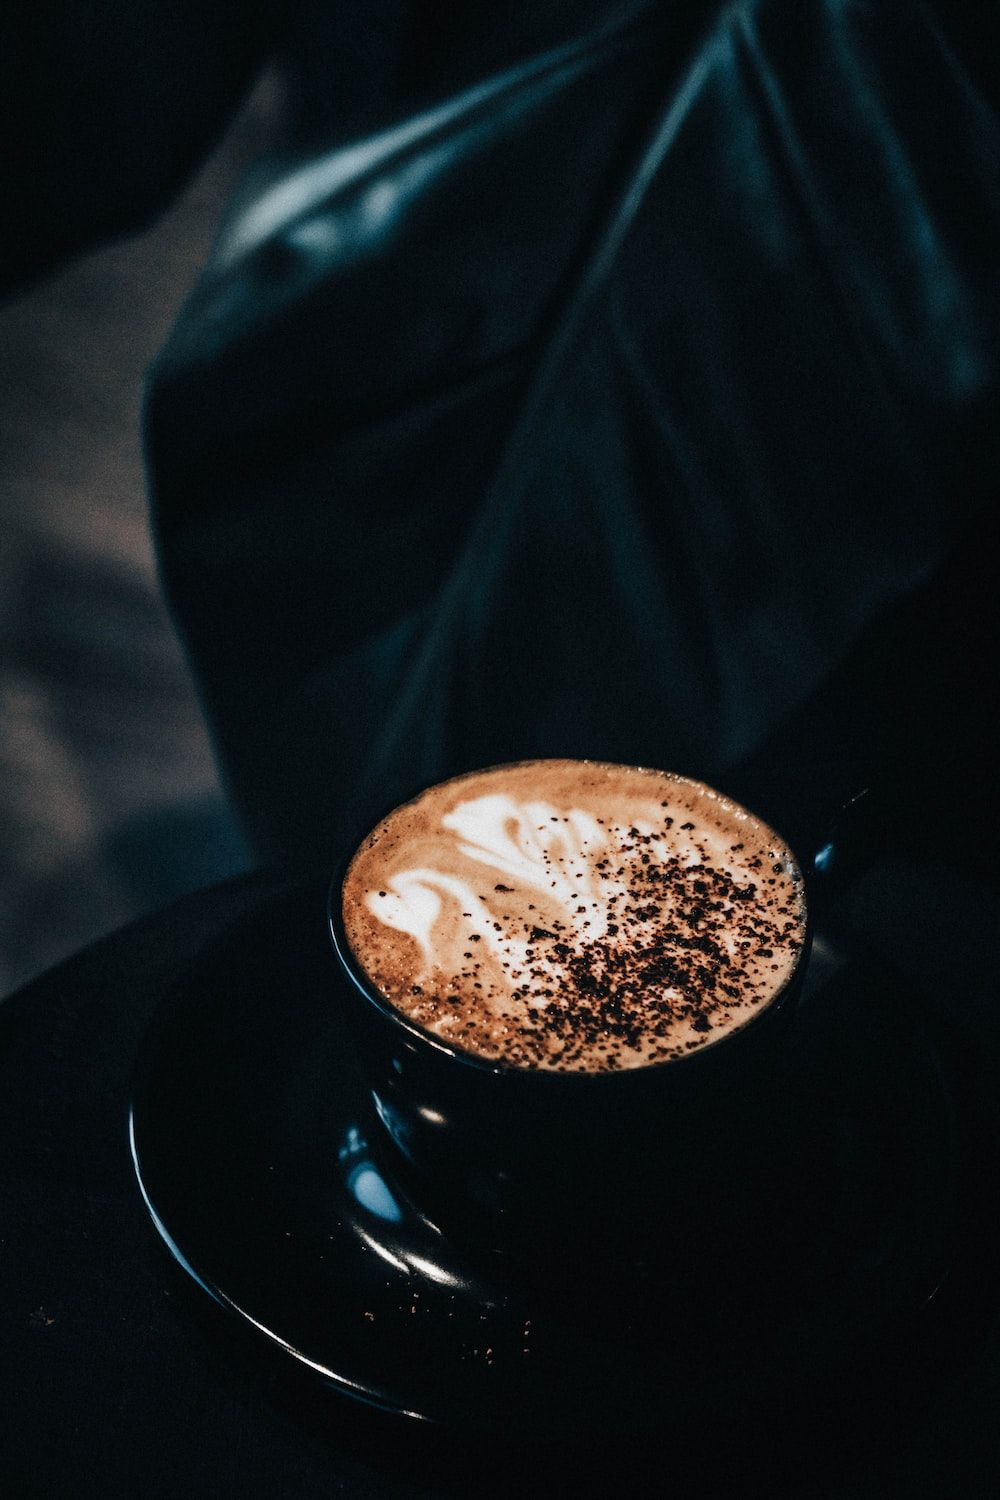 Aesthetic Coffee Picture. Download Free Image